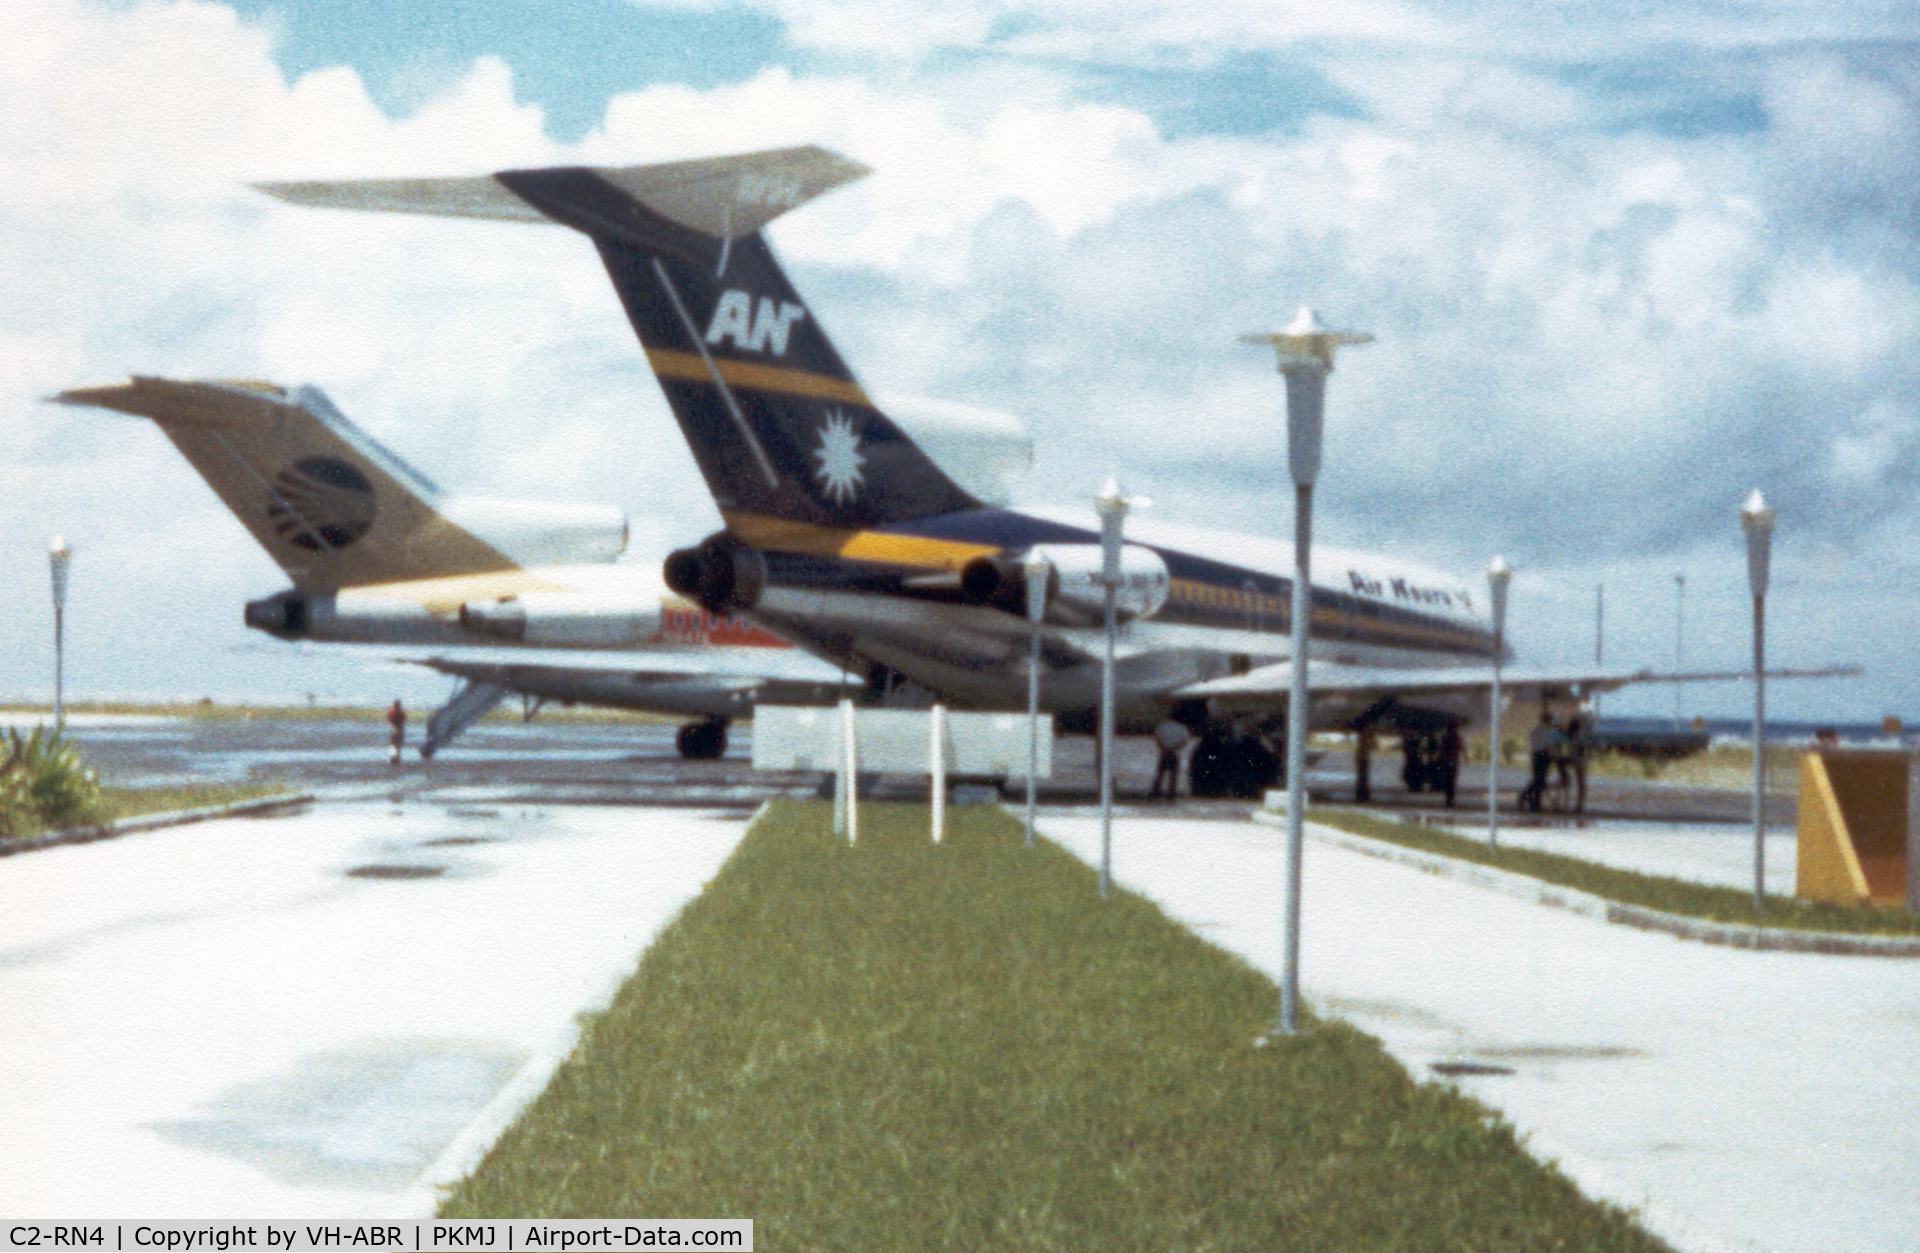 C2-RN4, 1970 Boeing 727-77QC C/N 20370, Continental 727 in the background